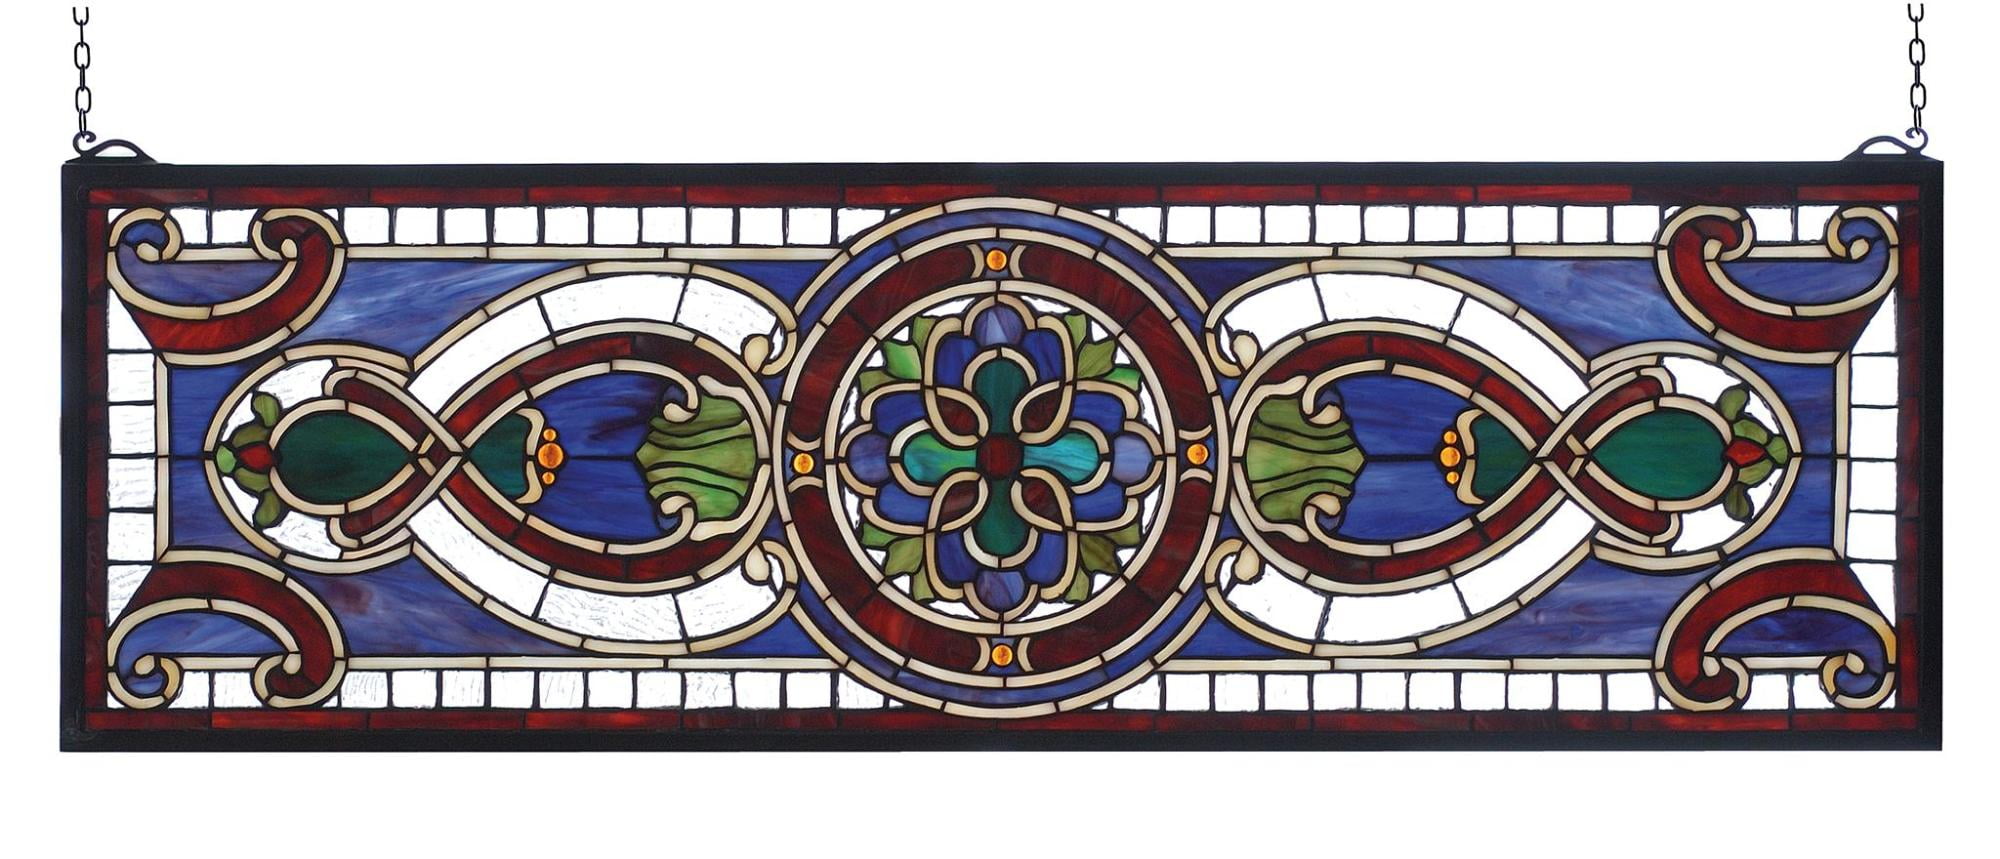 36" Wide X 11" High Evelyn in Lapis Stained Glass Window